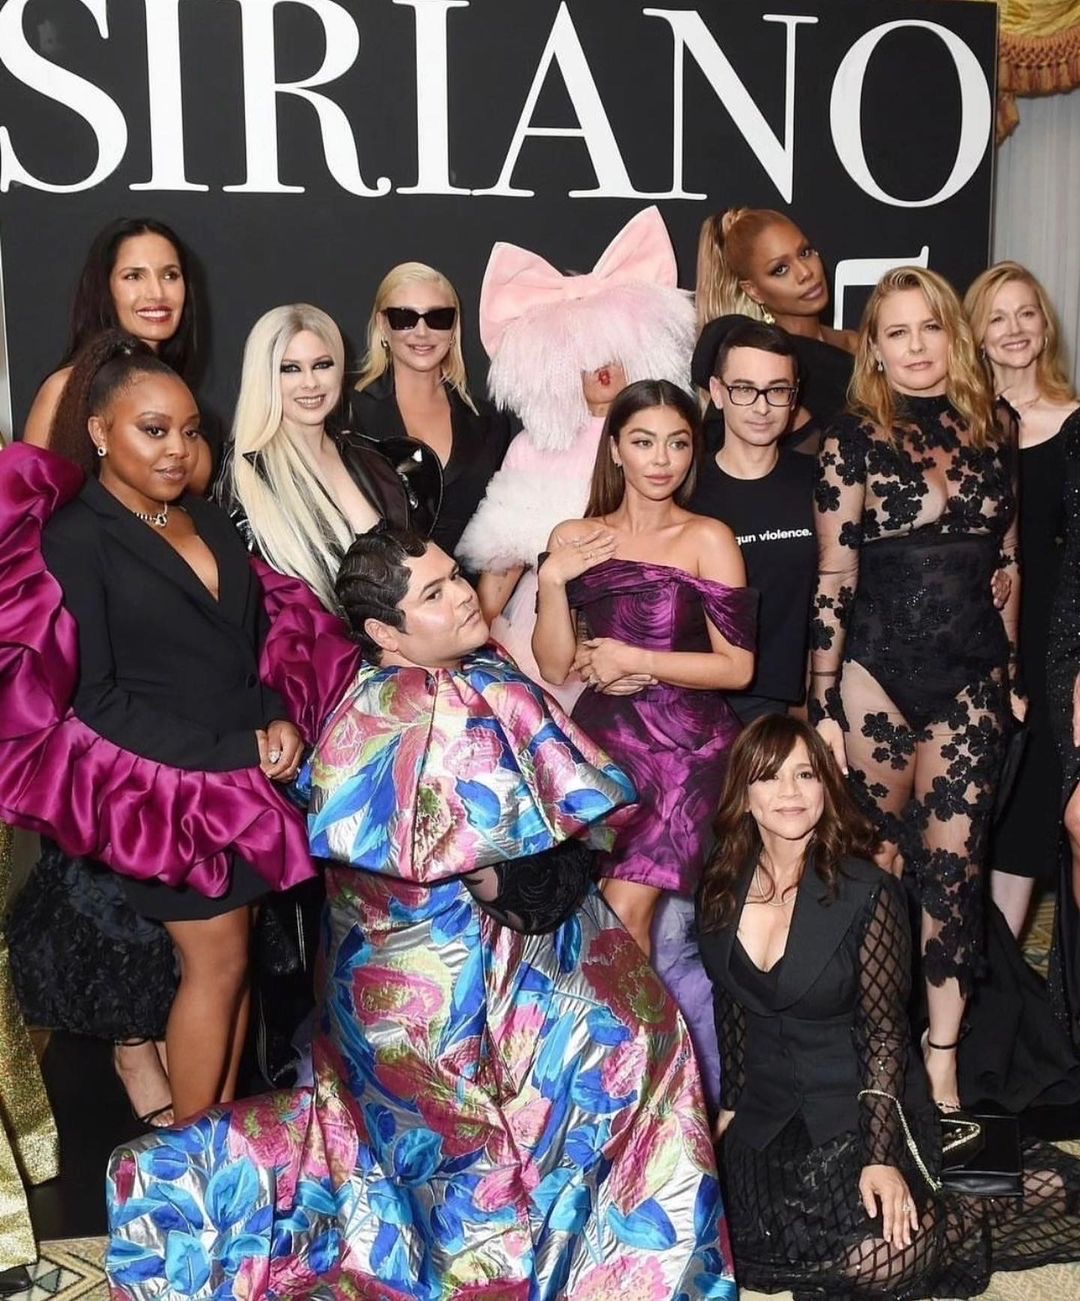 Christian Siriano Celebrated His 15th Anniversary at New York Fashion Week with Bold and Modern Ballerina Silhouettes